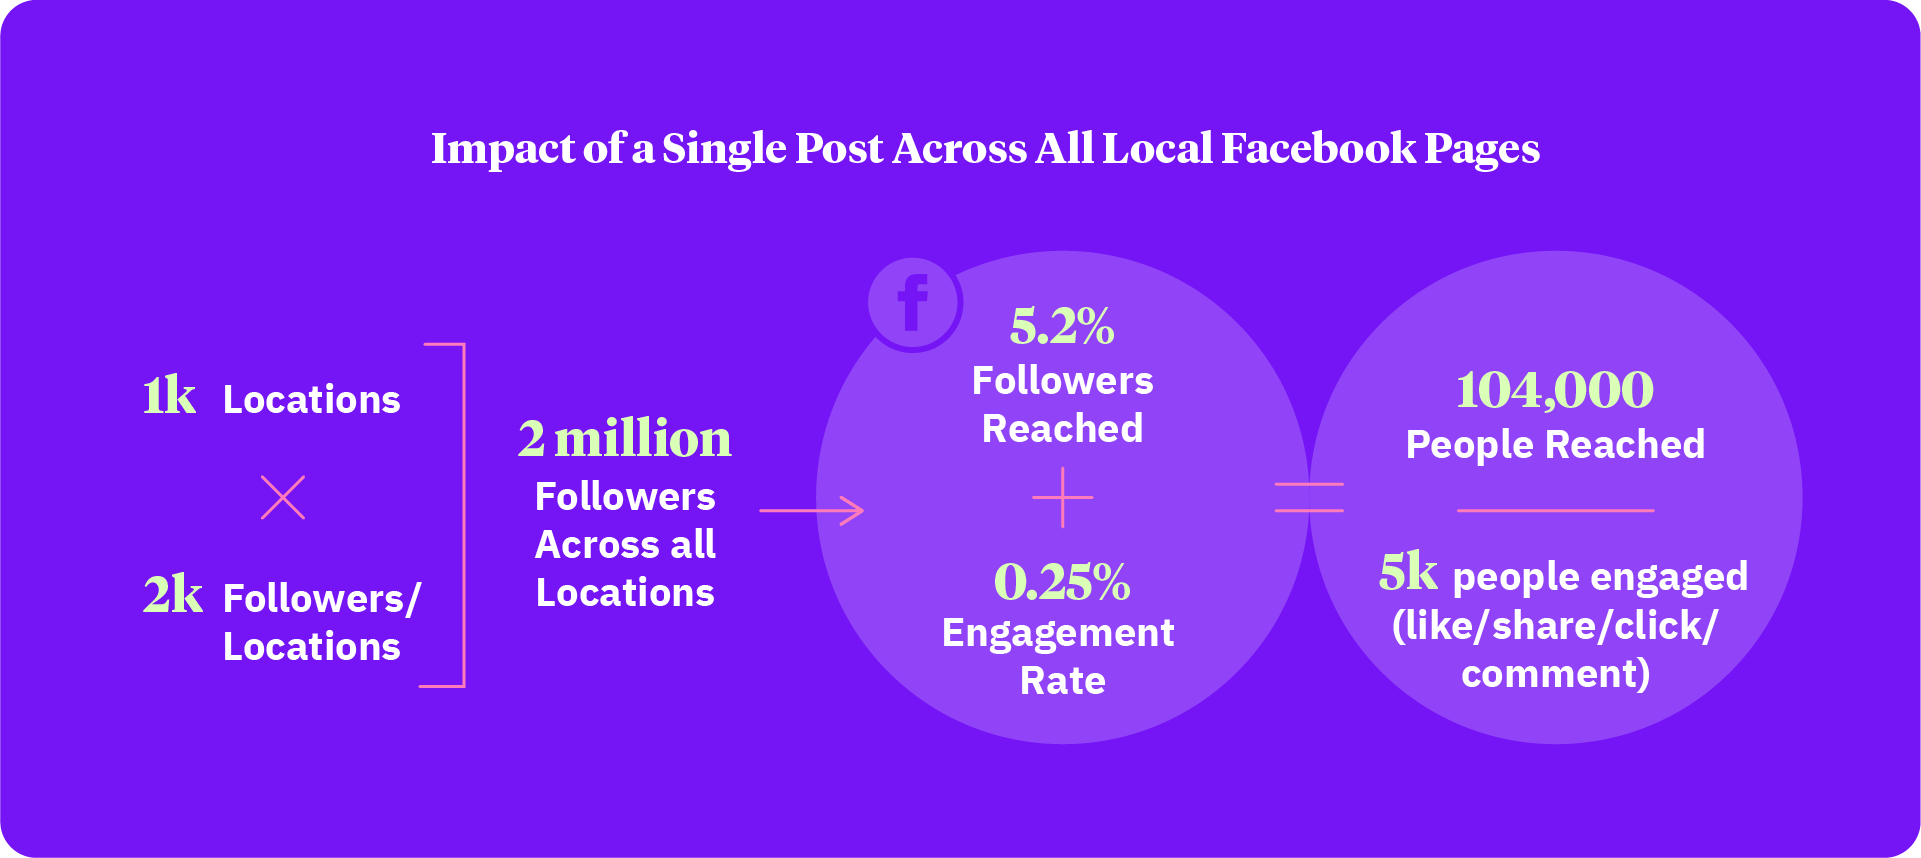 Impact of a Single Post Across All Local Facebook Pages